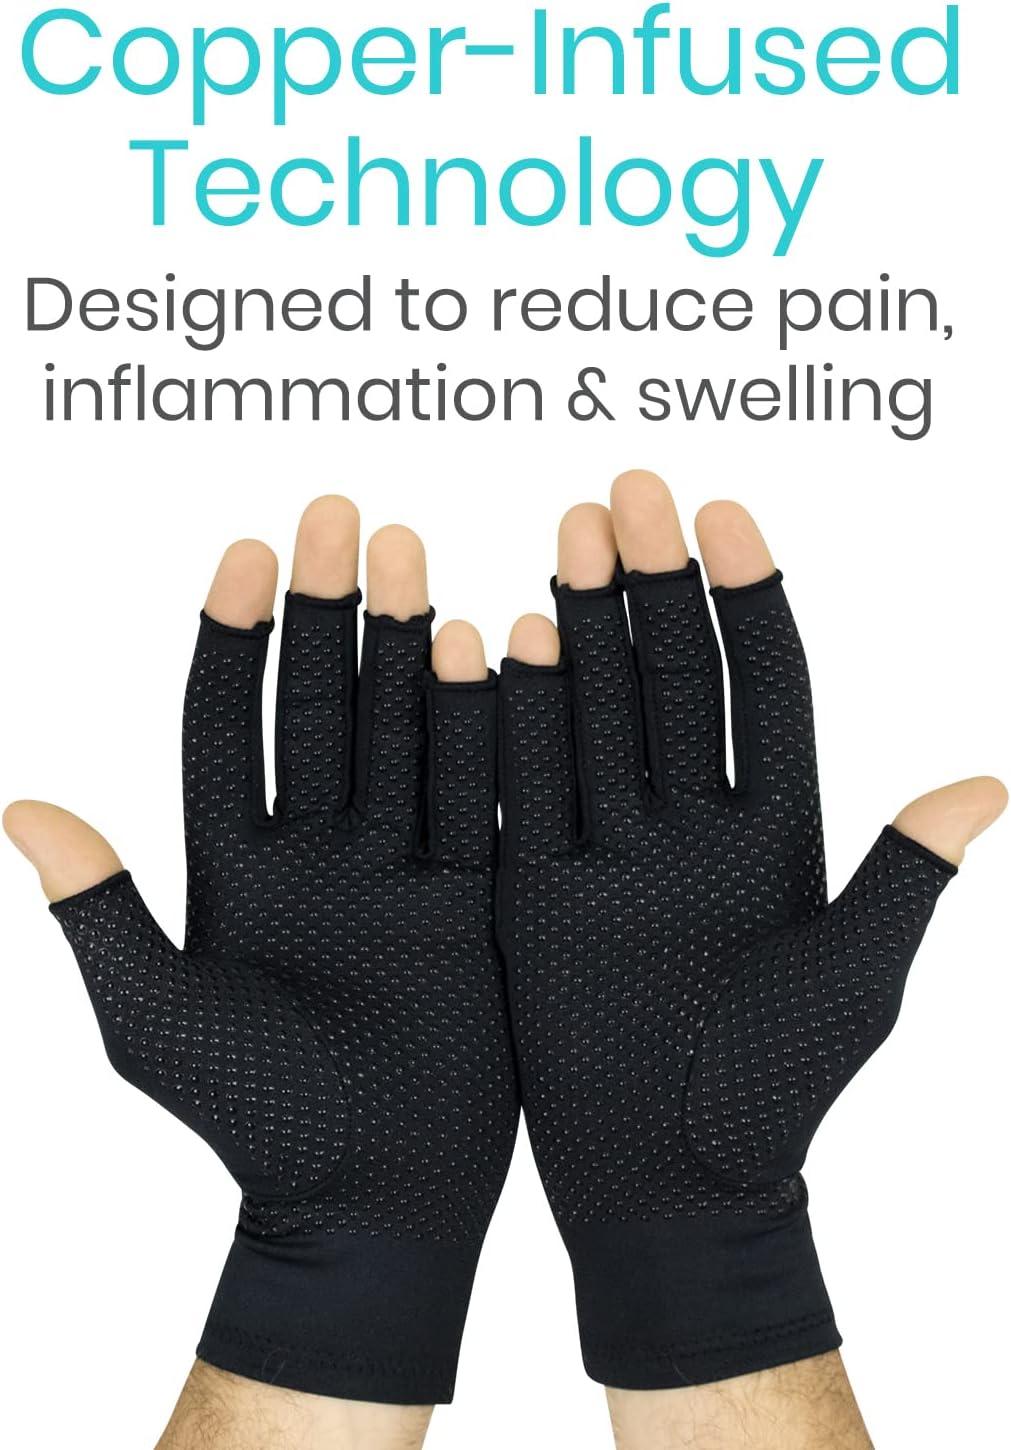  Vive Fingerless Arthritis Gloves For Men & Women Made  w/Copper Infused Fabric - Therapeutic Compression For Swelling, Carpal  Tunnel, Tendonitis, Edema, & Finger Pain - Comfortable Non-Slip